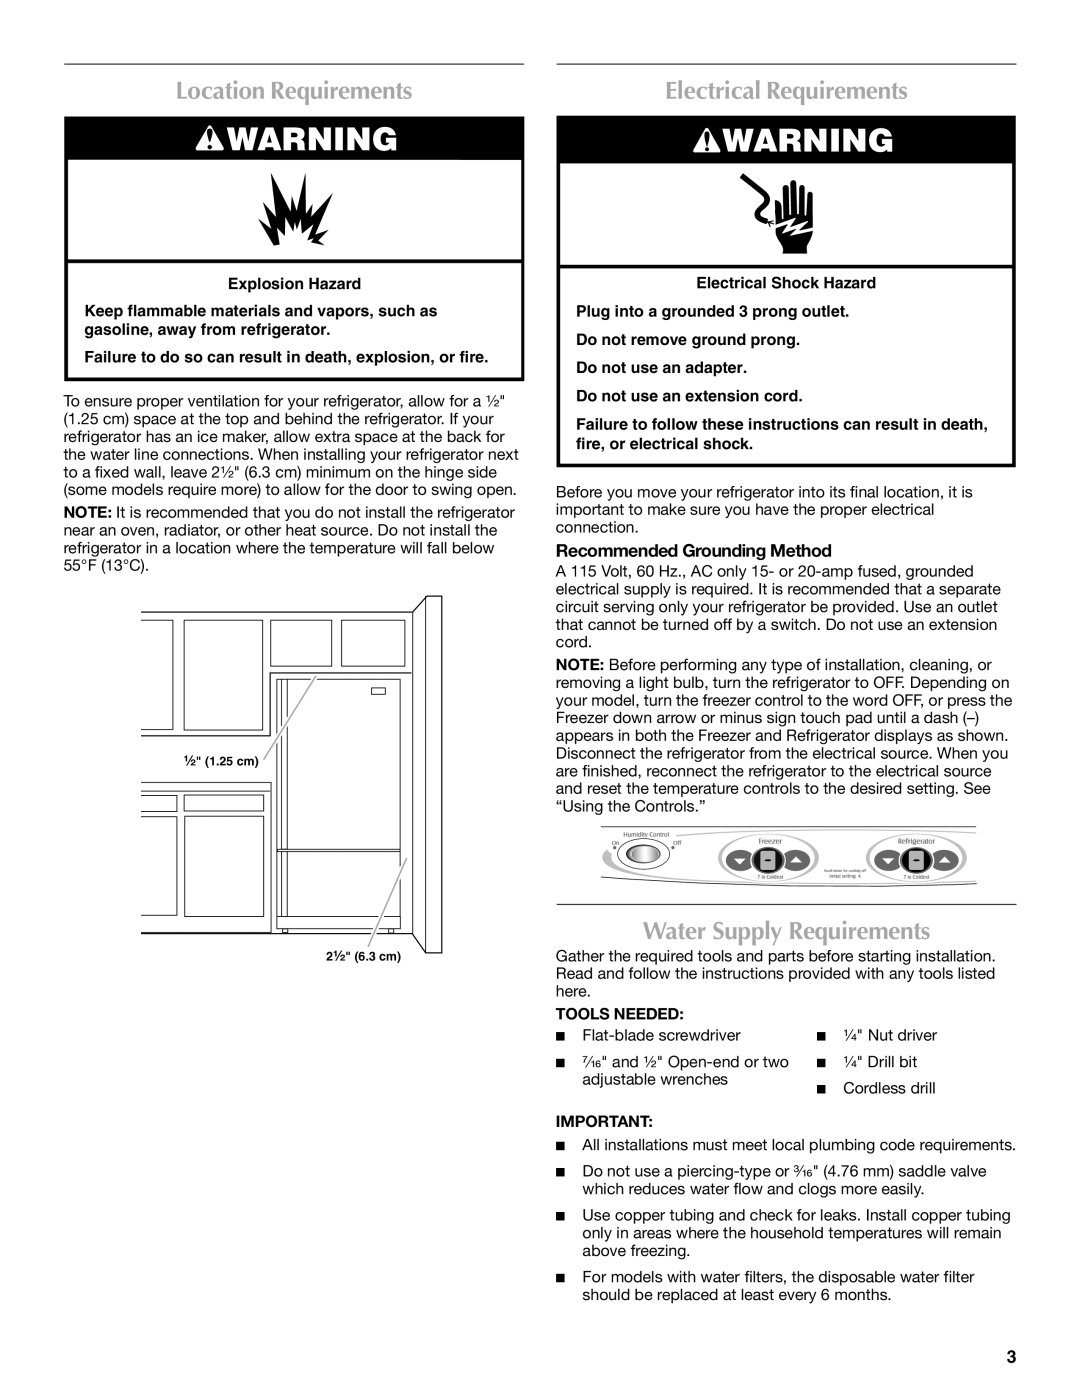 Maytag MFD2562VEW Location Requirements, Electrical Requirements, Water Supply Requirements, Recommended Grounding Method 